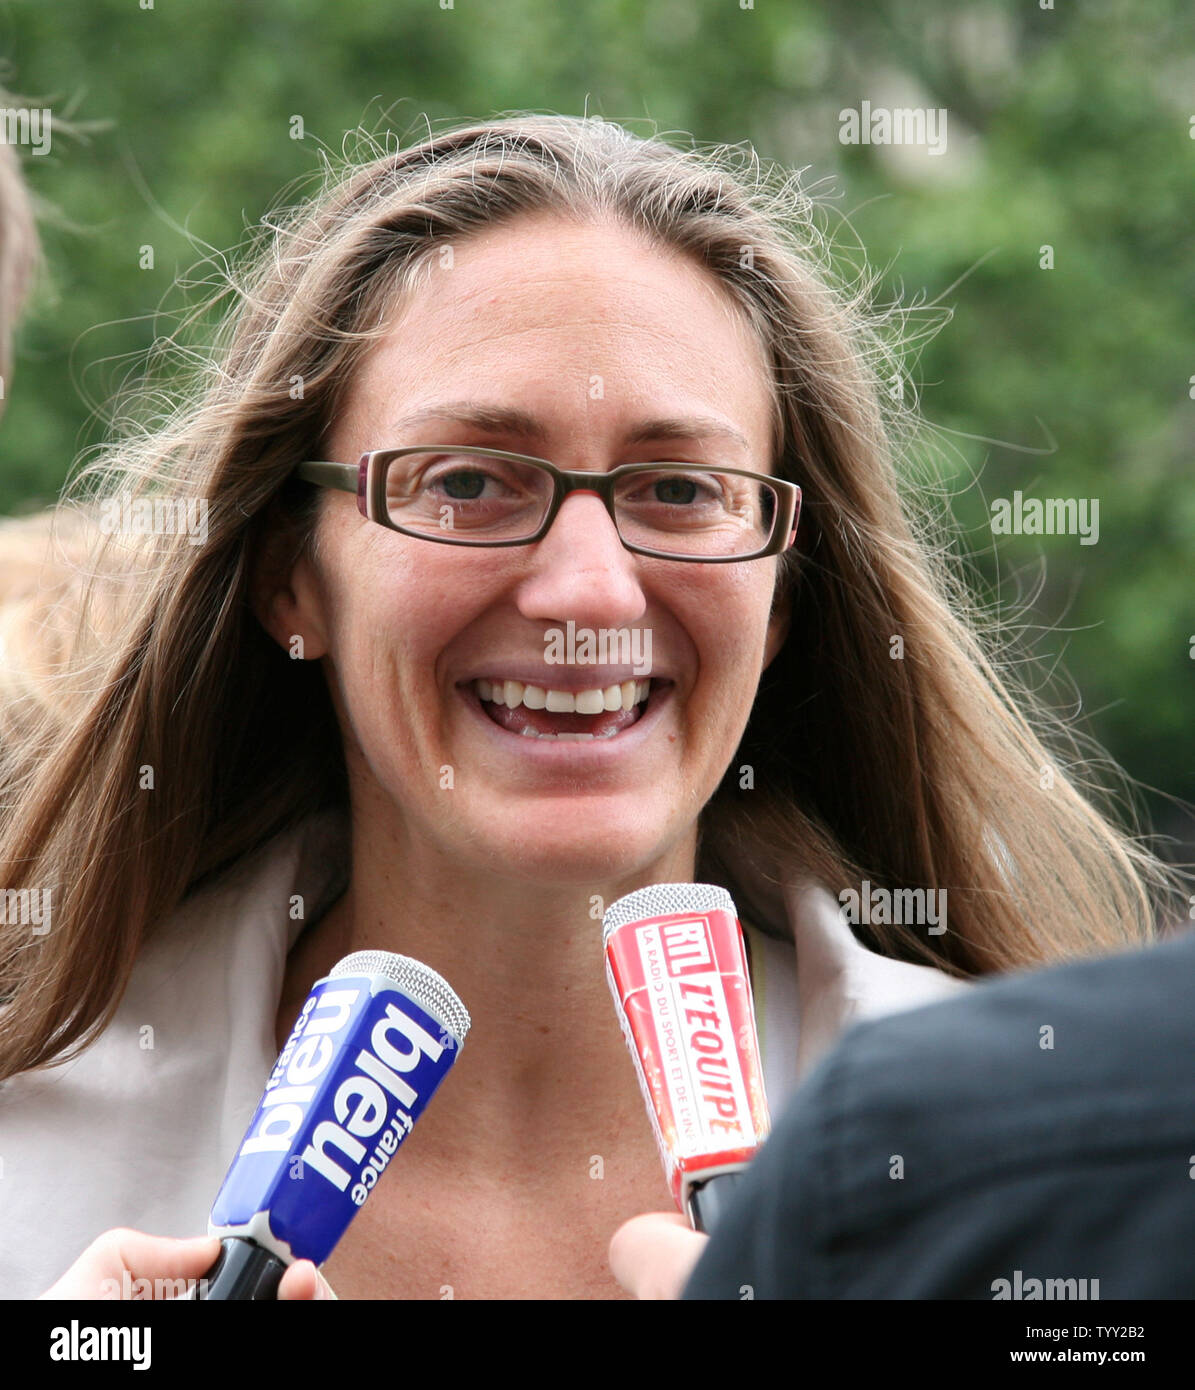 Tennis great Mary Pierce gives an interview during the launch of the exhibition 'Roland Garros in the City' in Paris on June 4, 2008.  The event coincides with the French Open tennis tournament taking place this week in Paris.   (UPI Photo/ David Silpa) Stock Photo